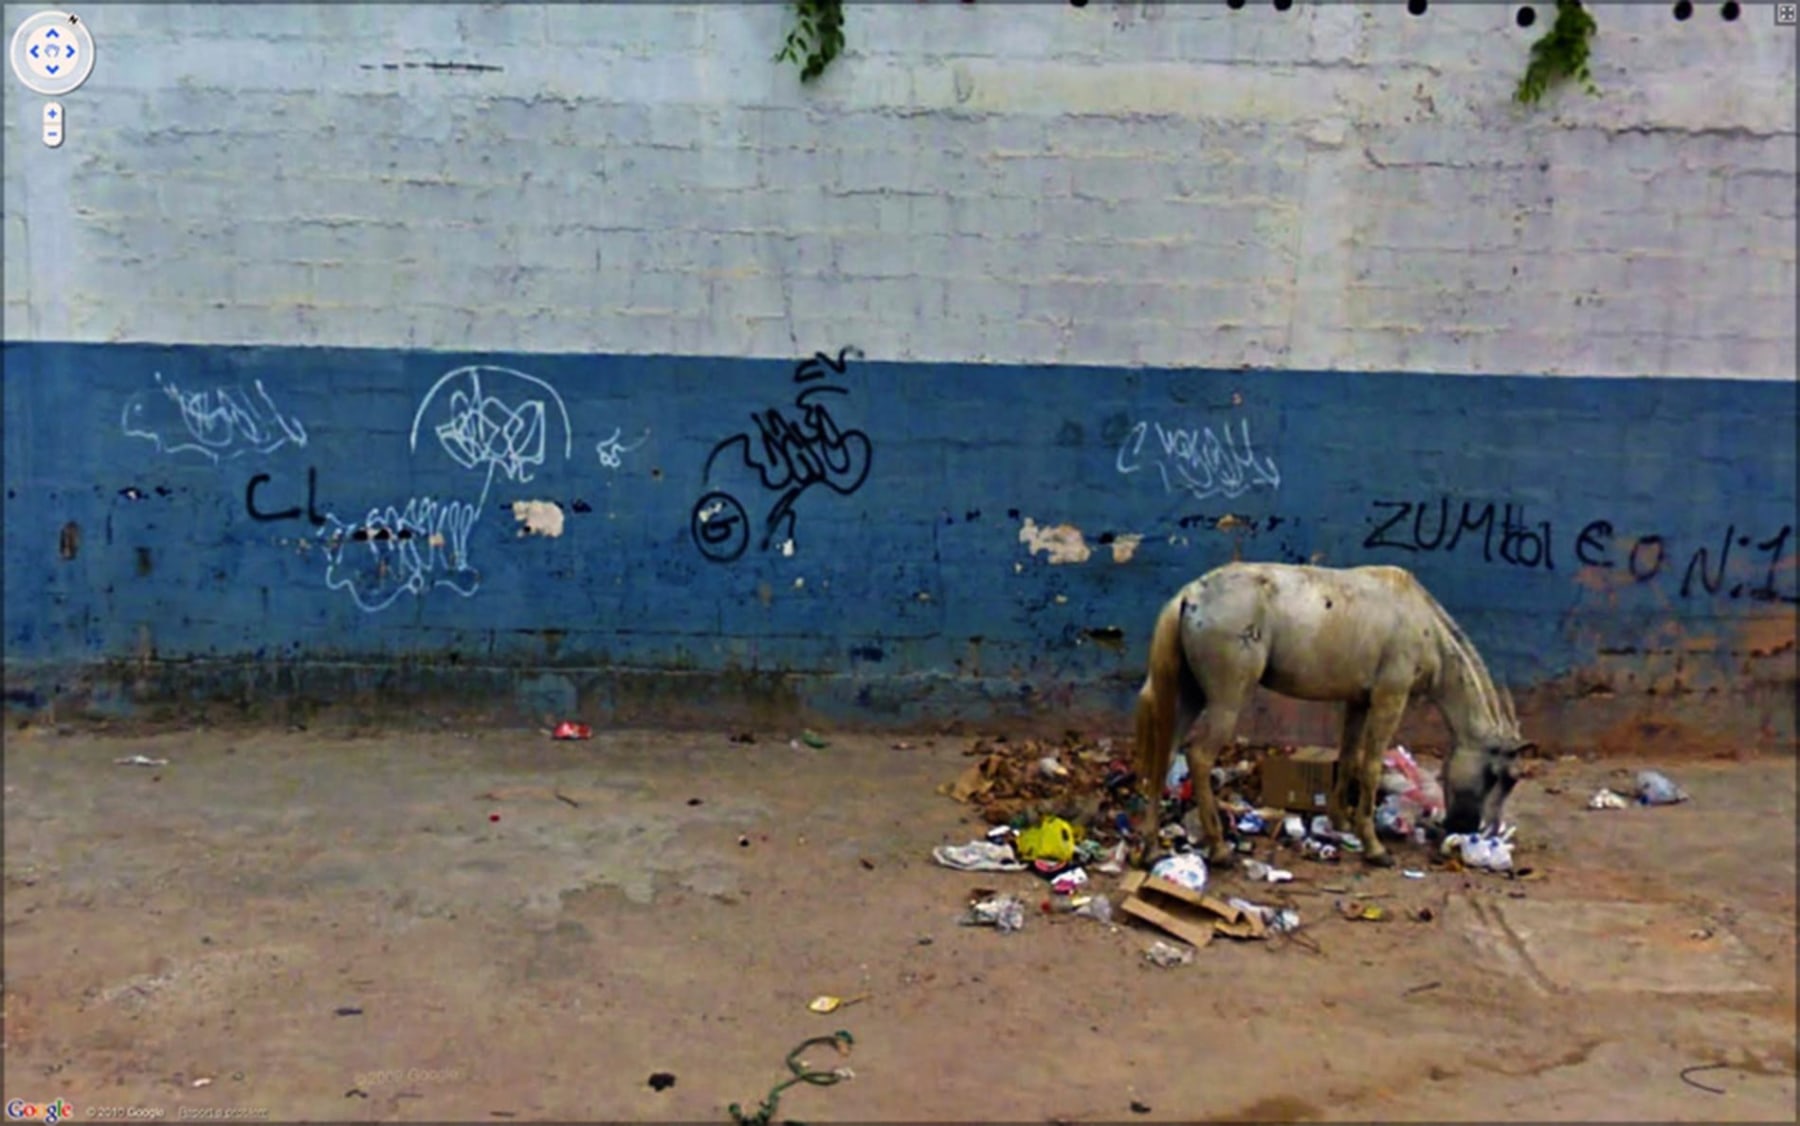 photograph of a horse looking through trash